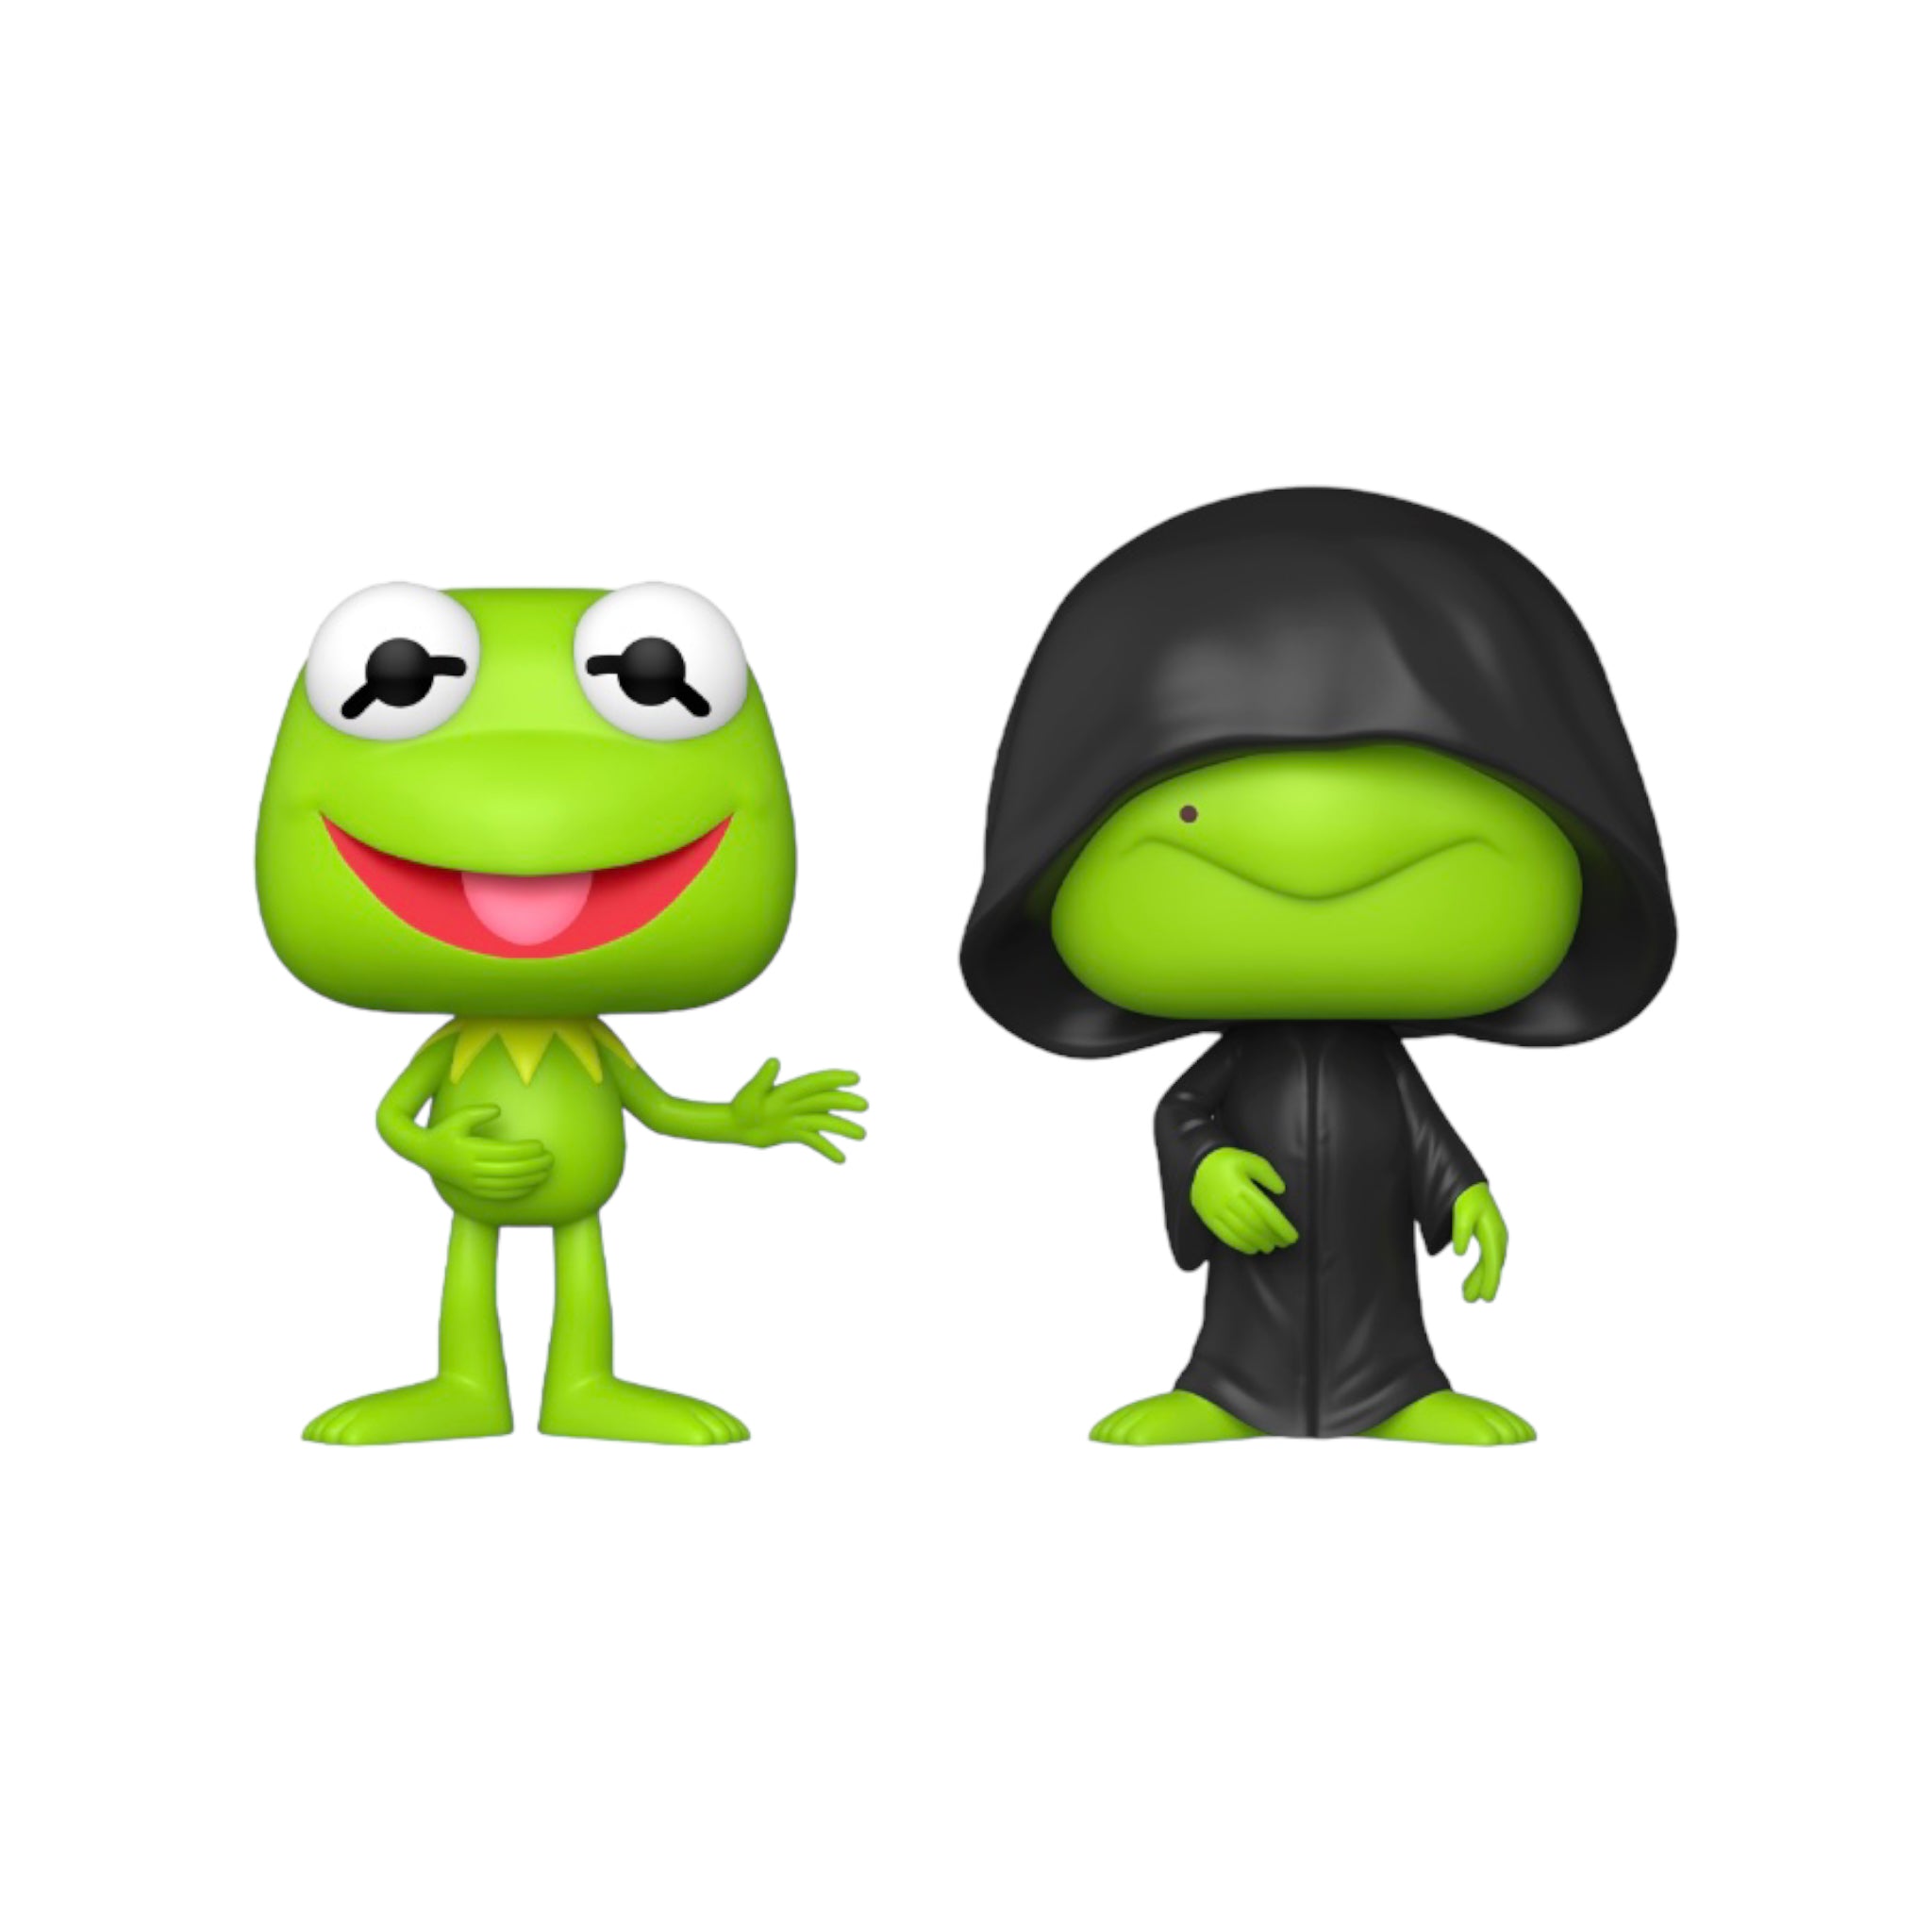 Kermit & Constantine 2 Pack Funko Pop! - The Muppets - Hot Topic Exclusive